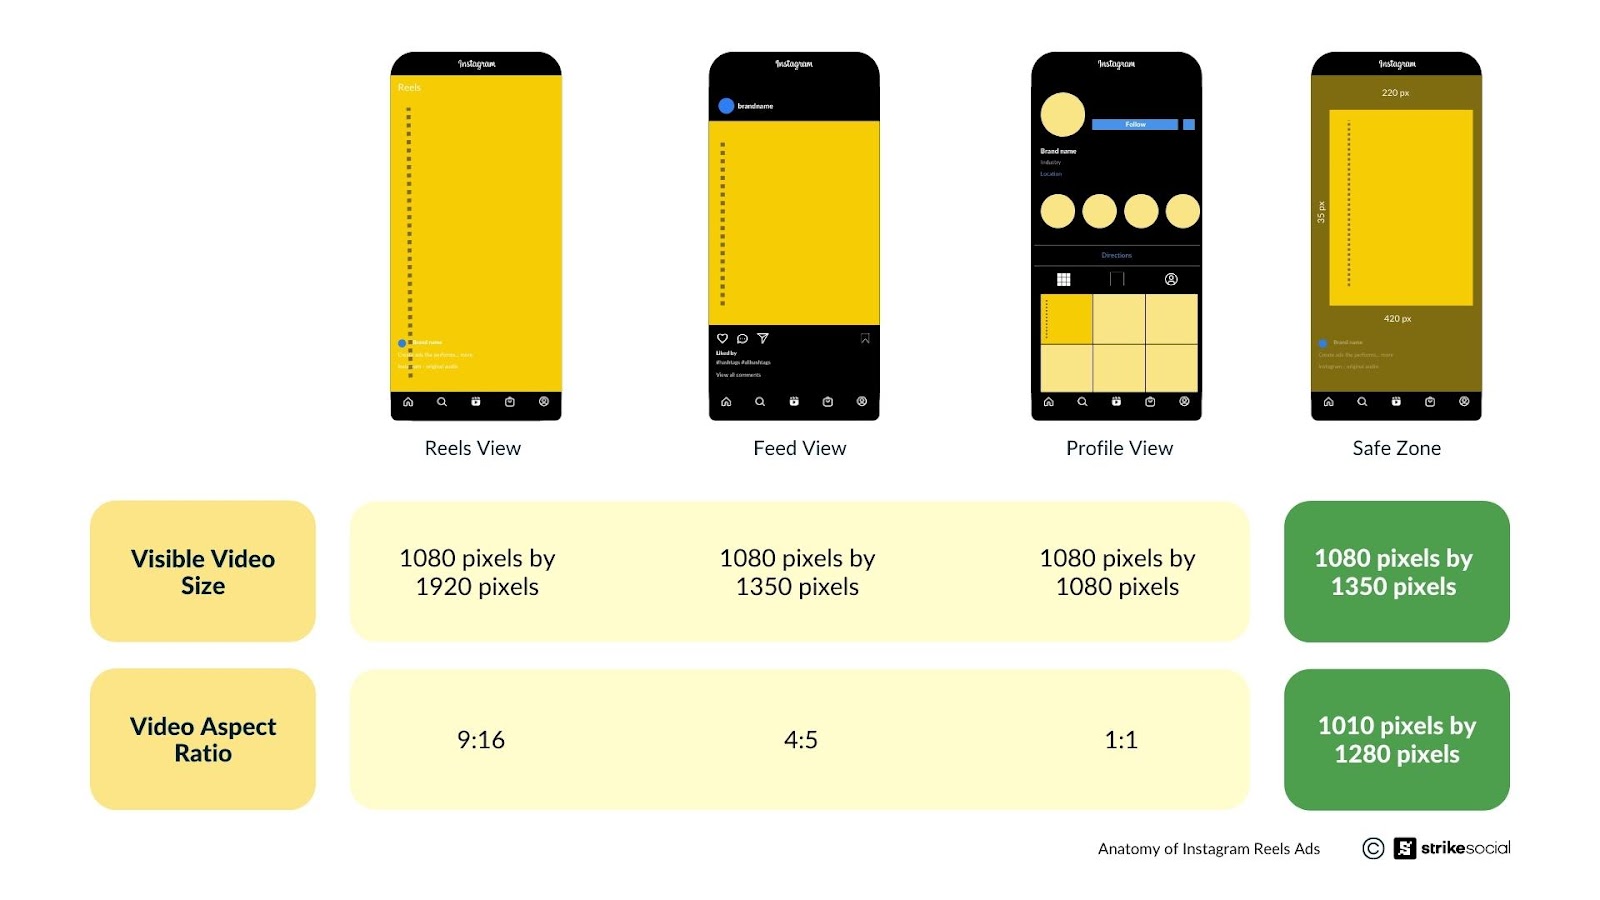 Anatomy of Instagram Reels Ads Visible video size and aspect ratio